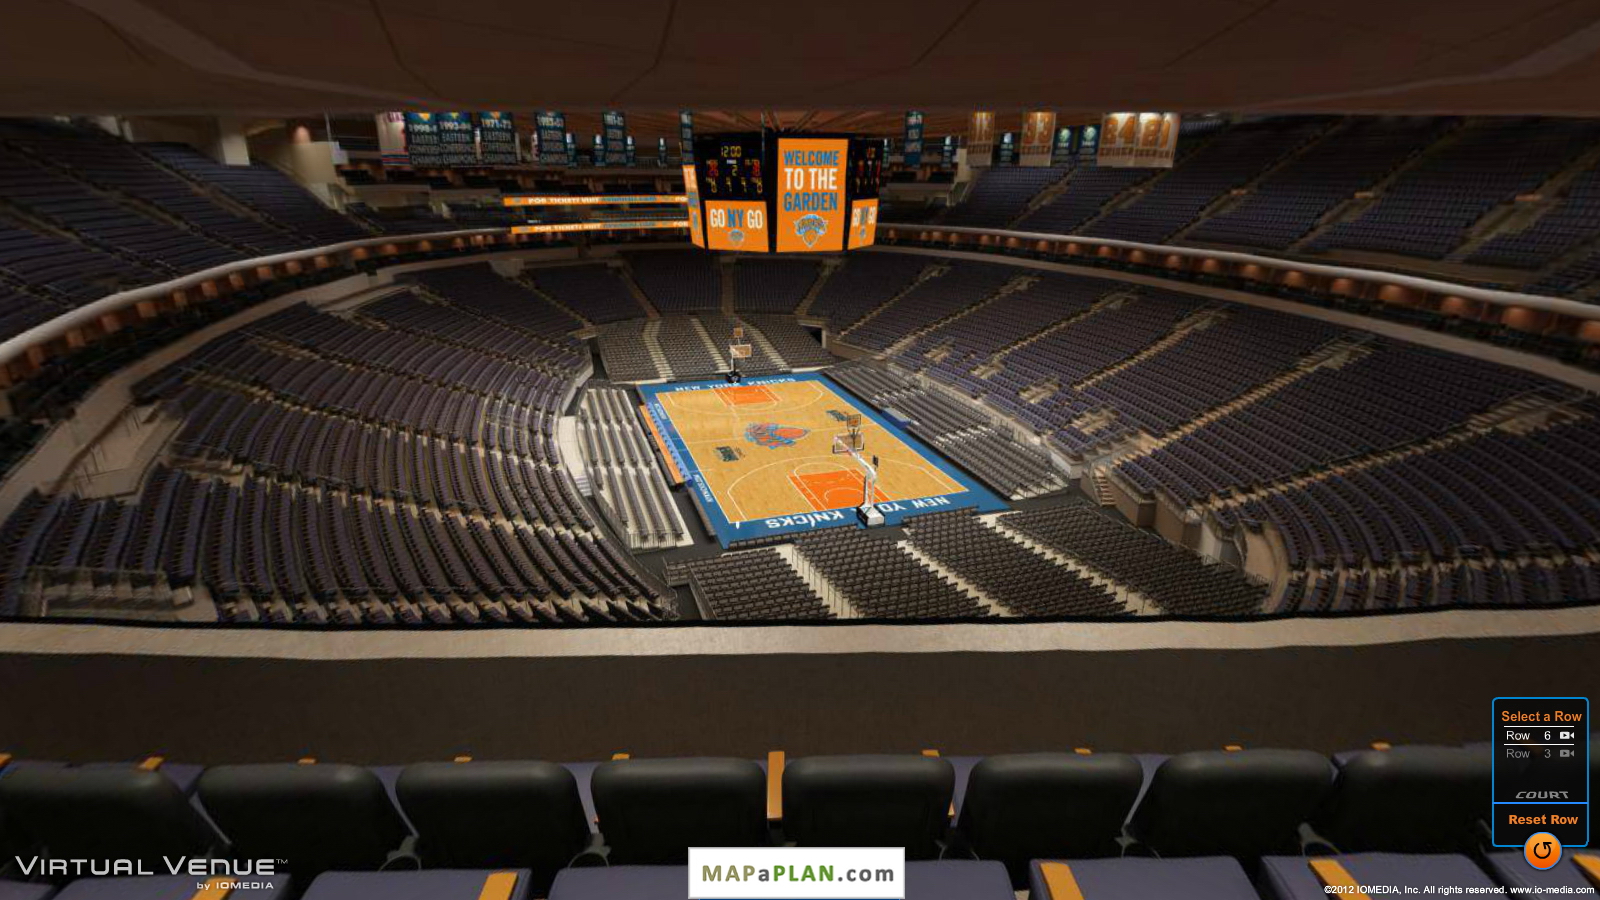 Madison square garden seating chart View from section 415